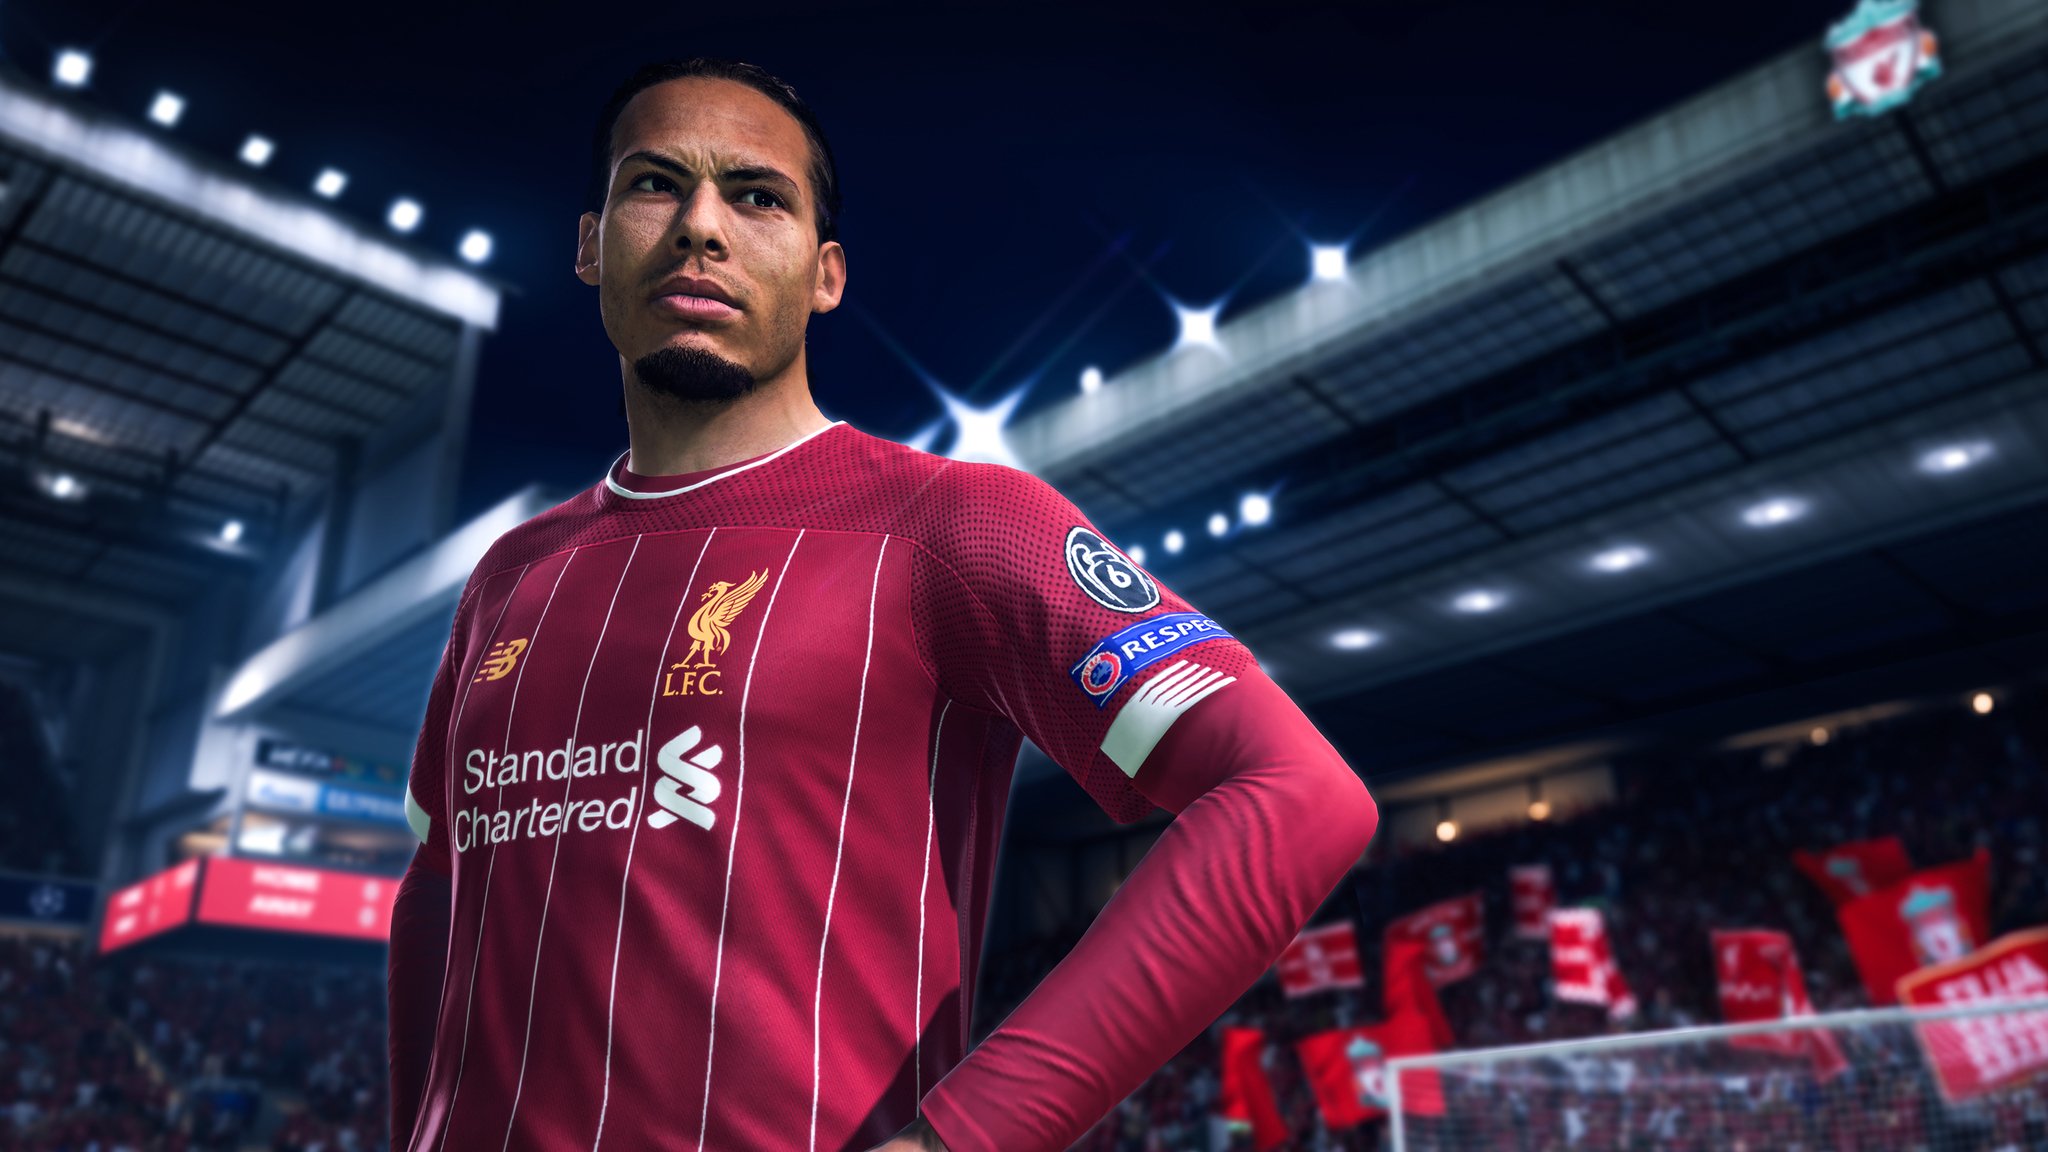 What about FIFA 21 Demo release date?